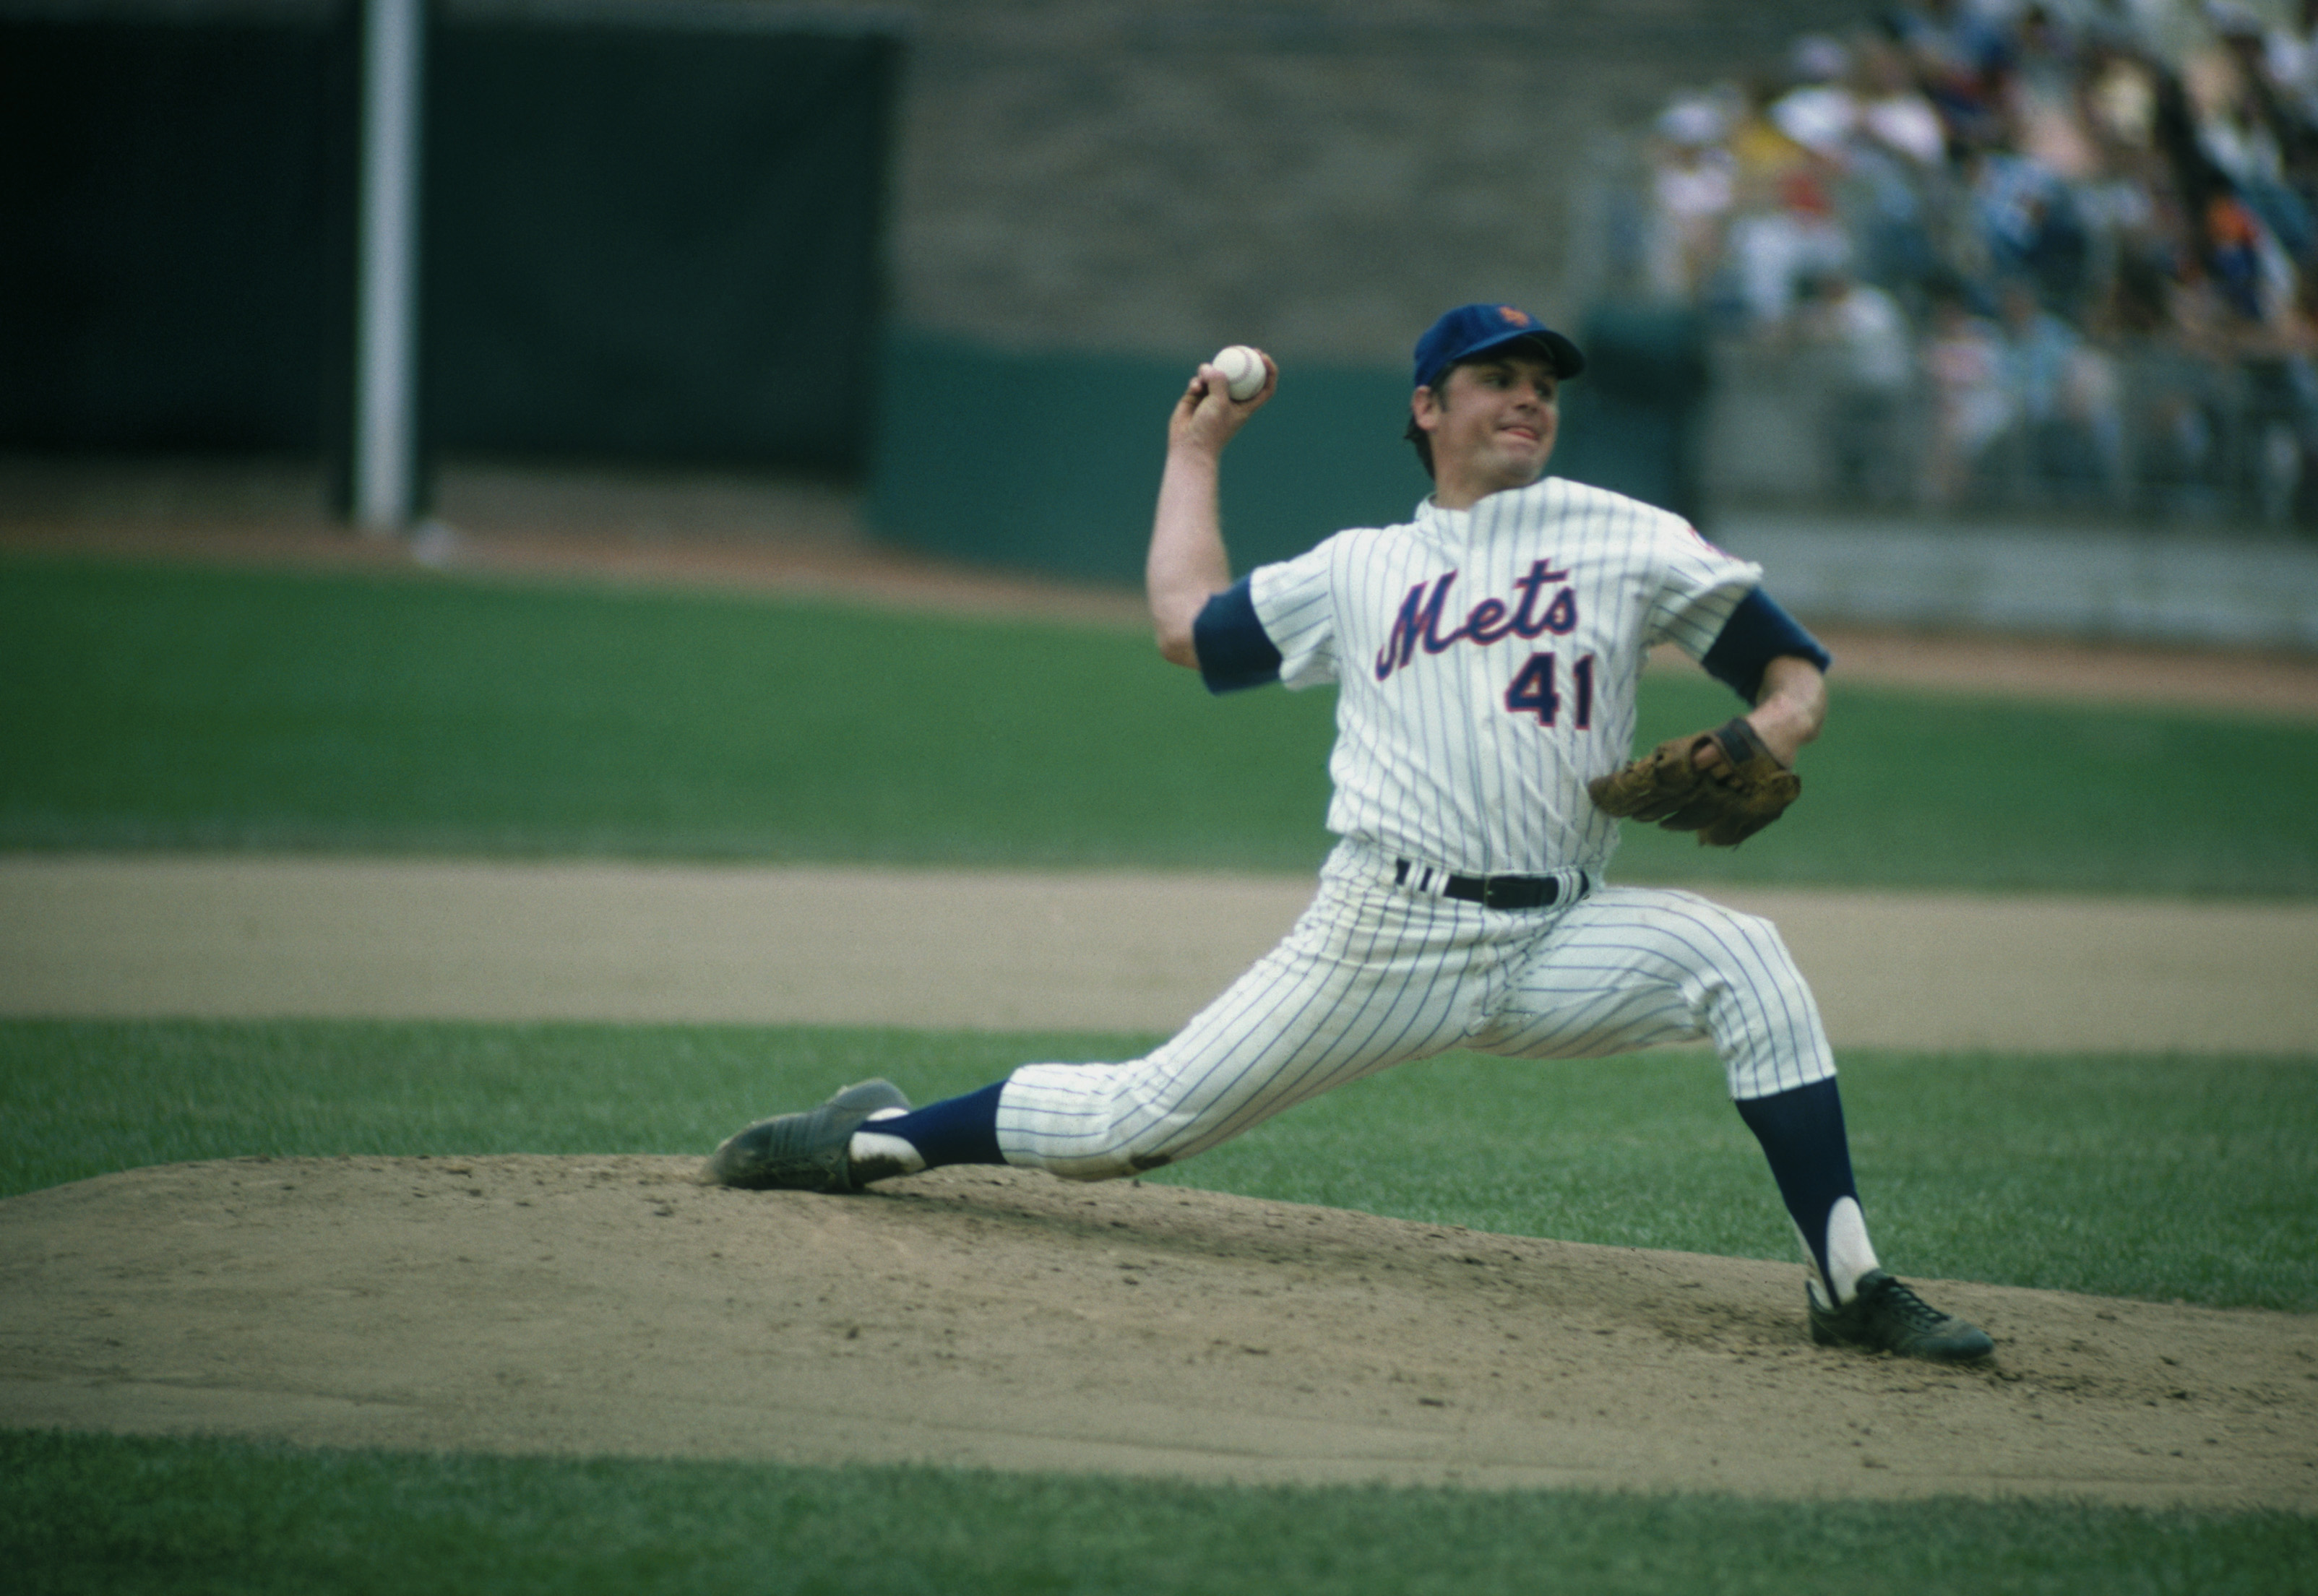 Mets to honor Tom Seaver with '41' patch on uniforms